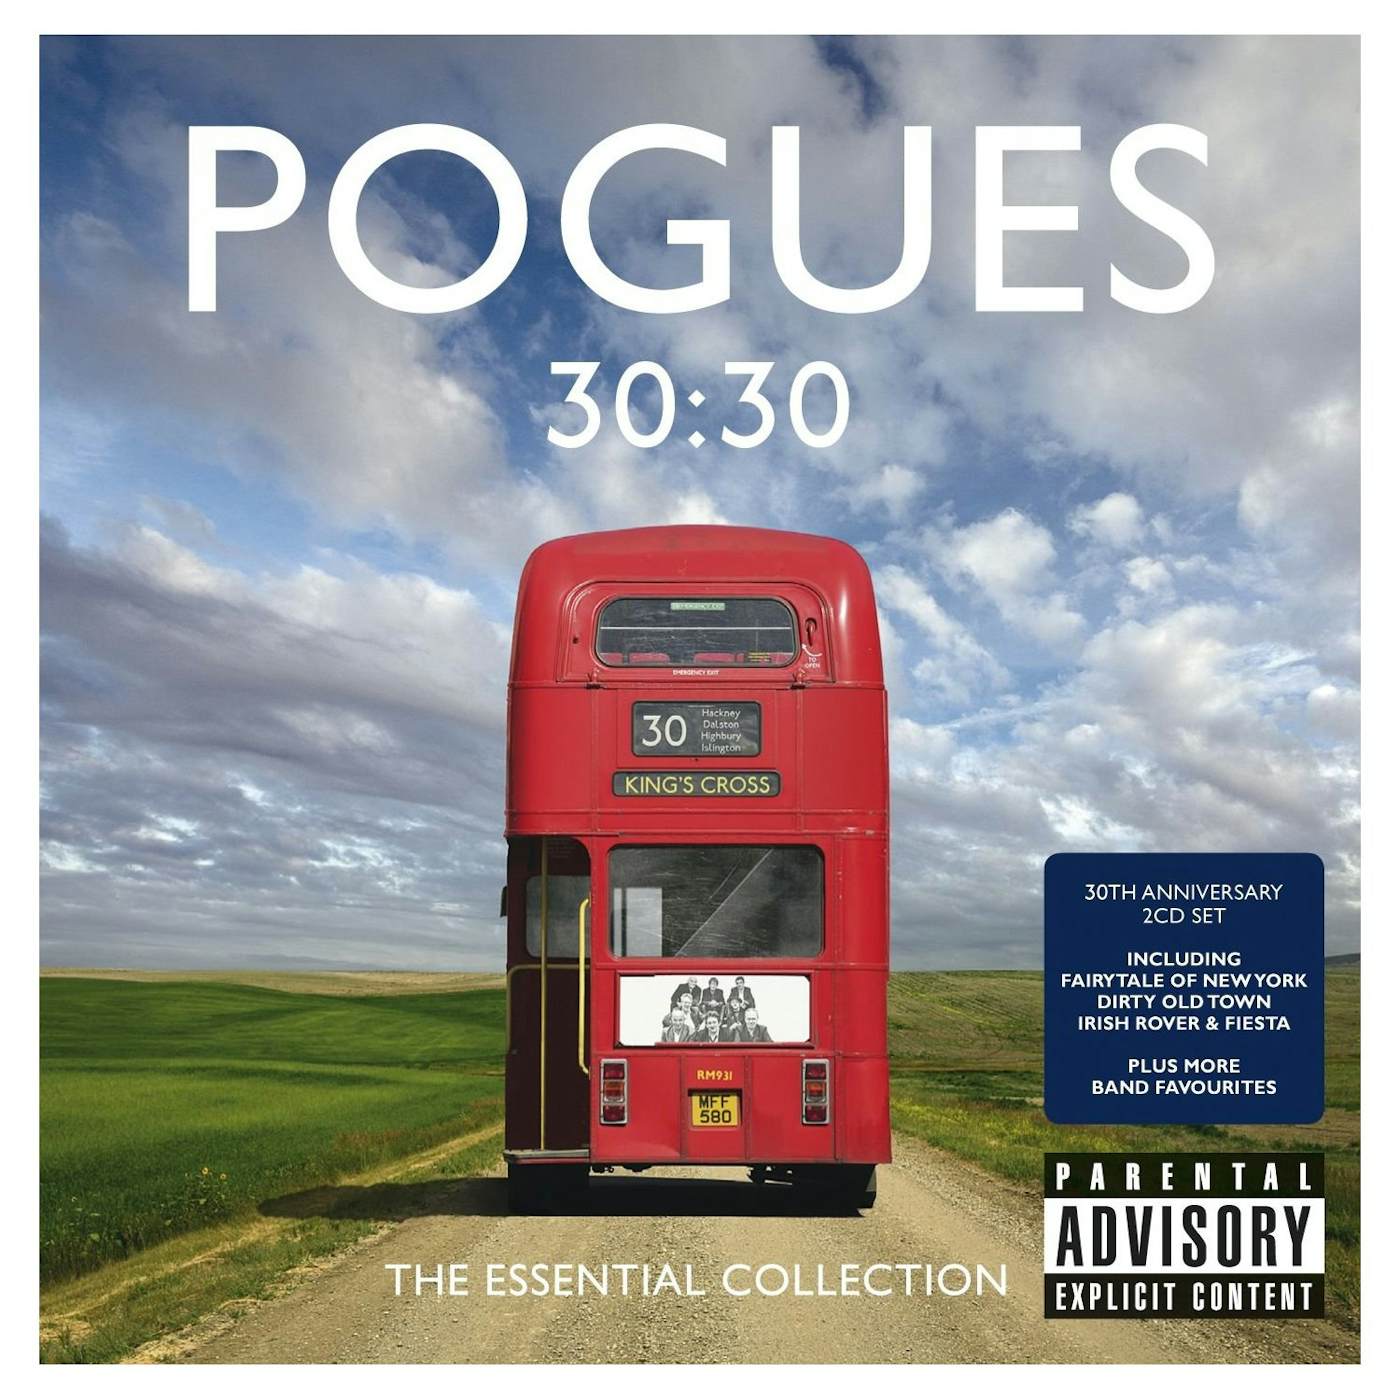 The Pogues 30:30: ESSENTIAL COLLECTION CD